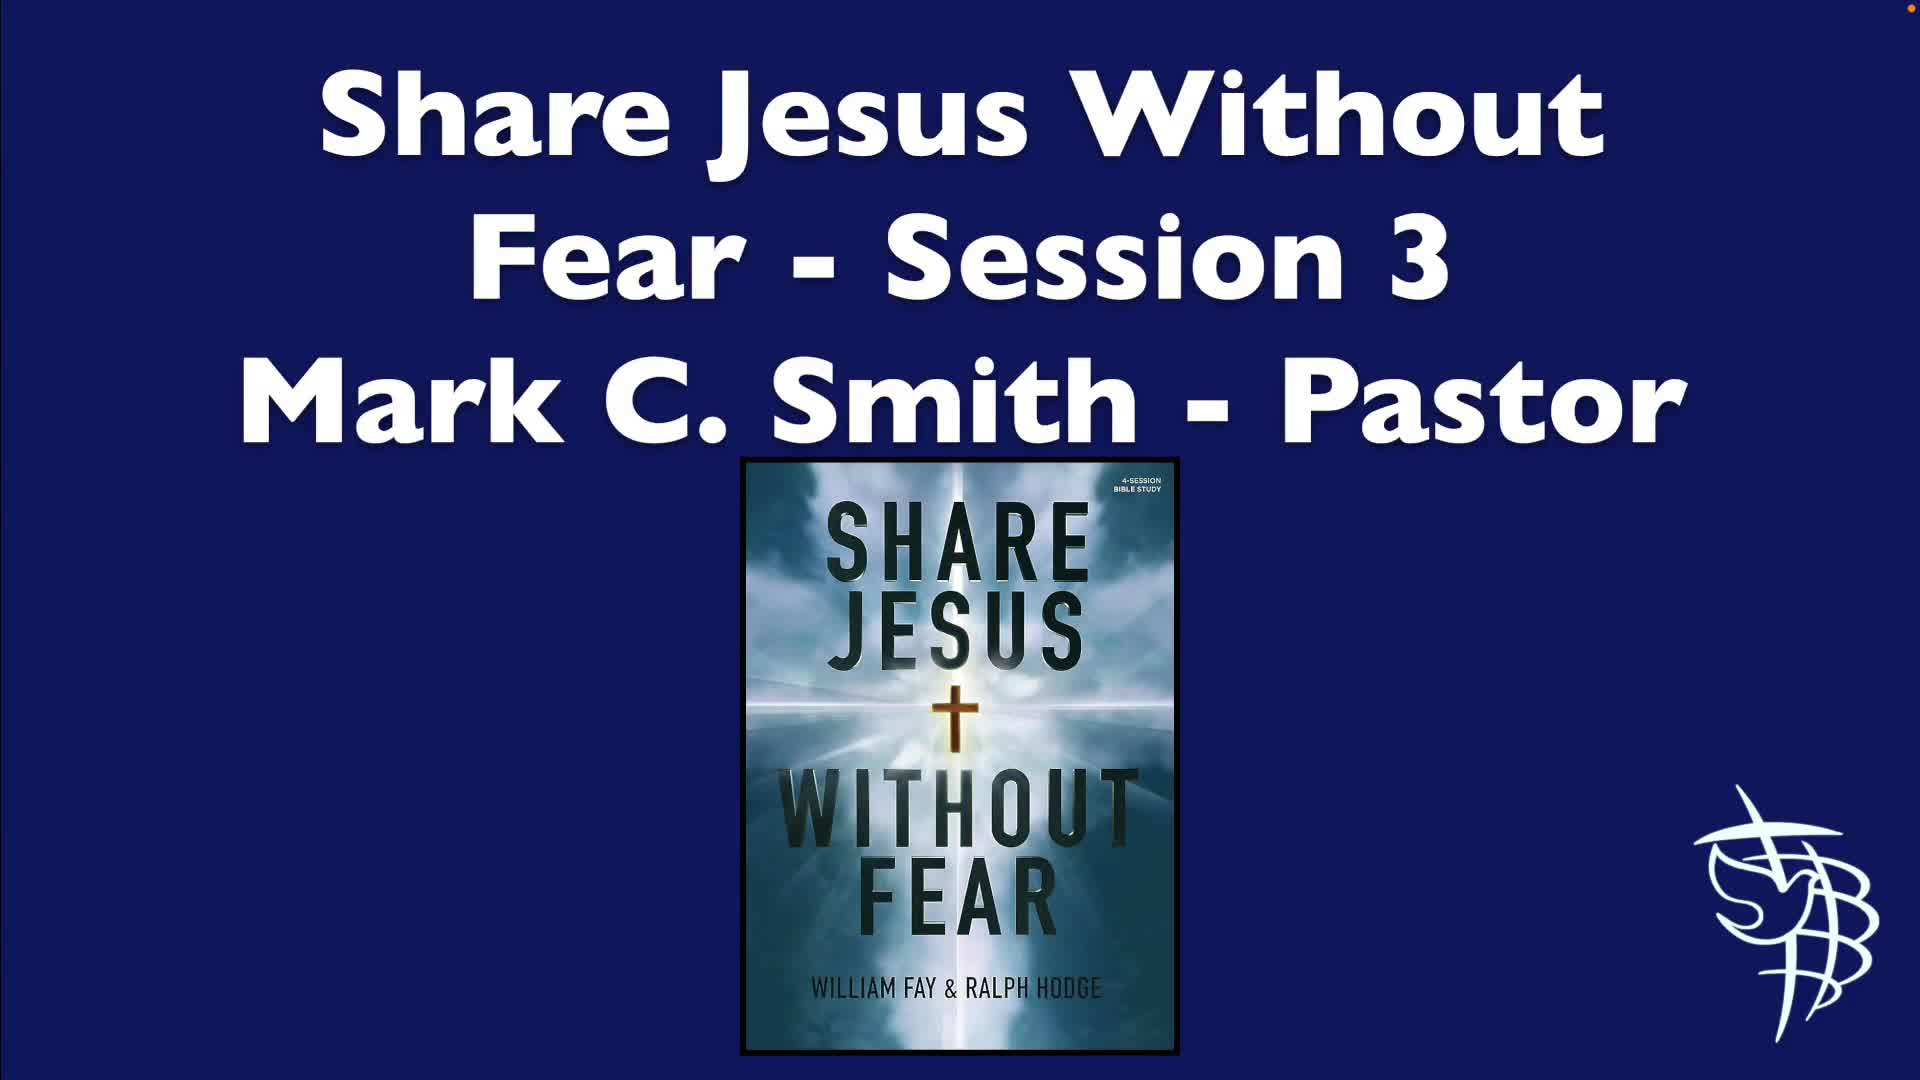 Share Jesus Without Fear  Session 3